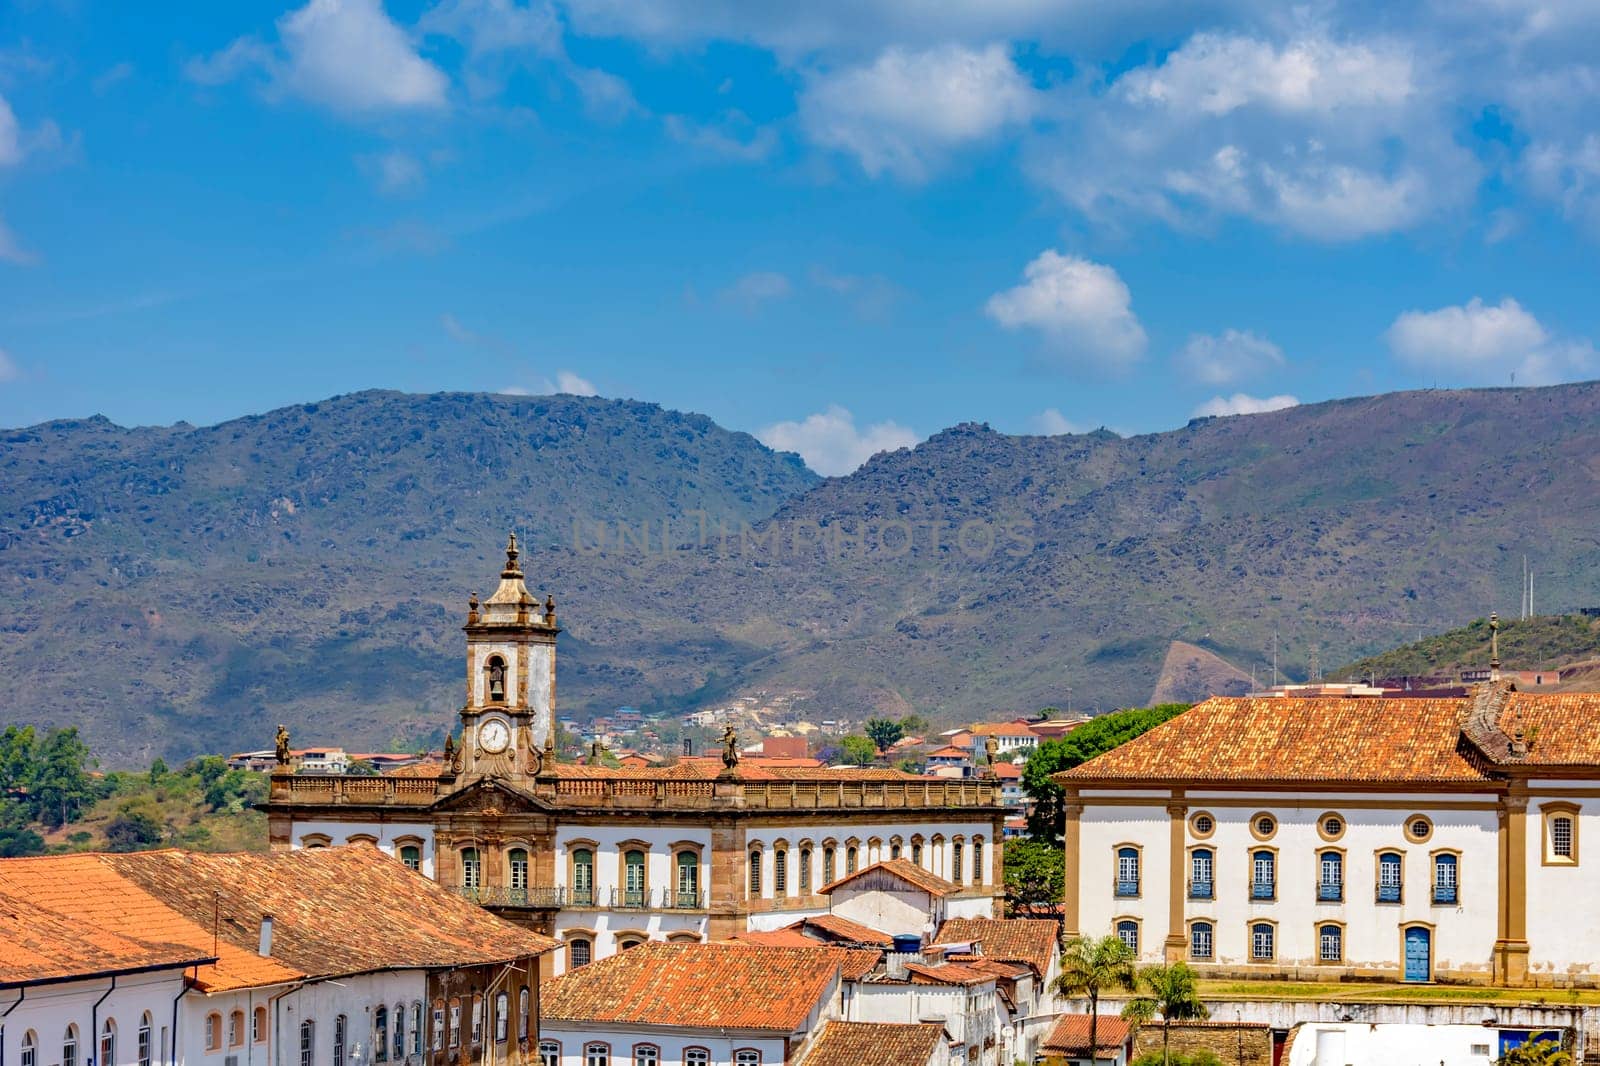 View from the top of the historic center of Ouro Preto with its houses, church, monuments and mountains